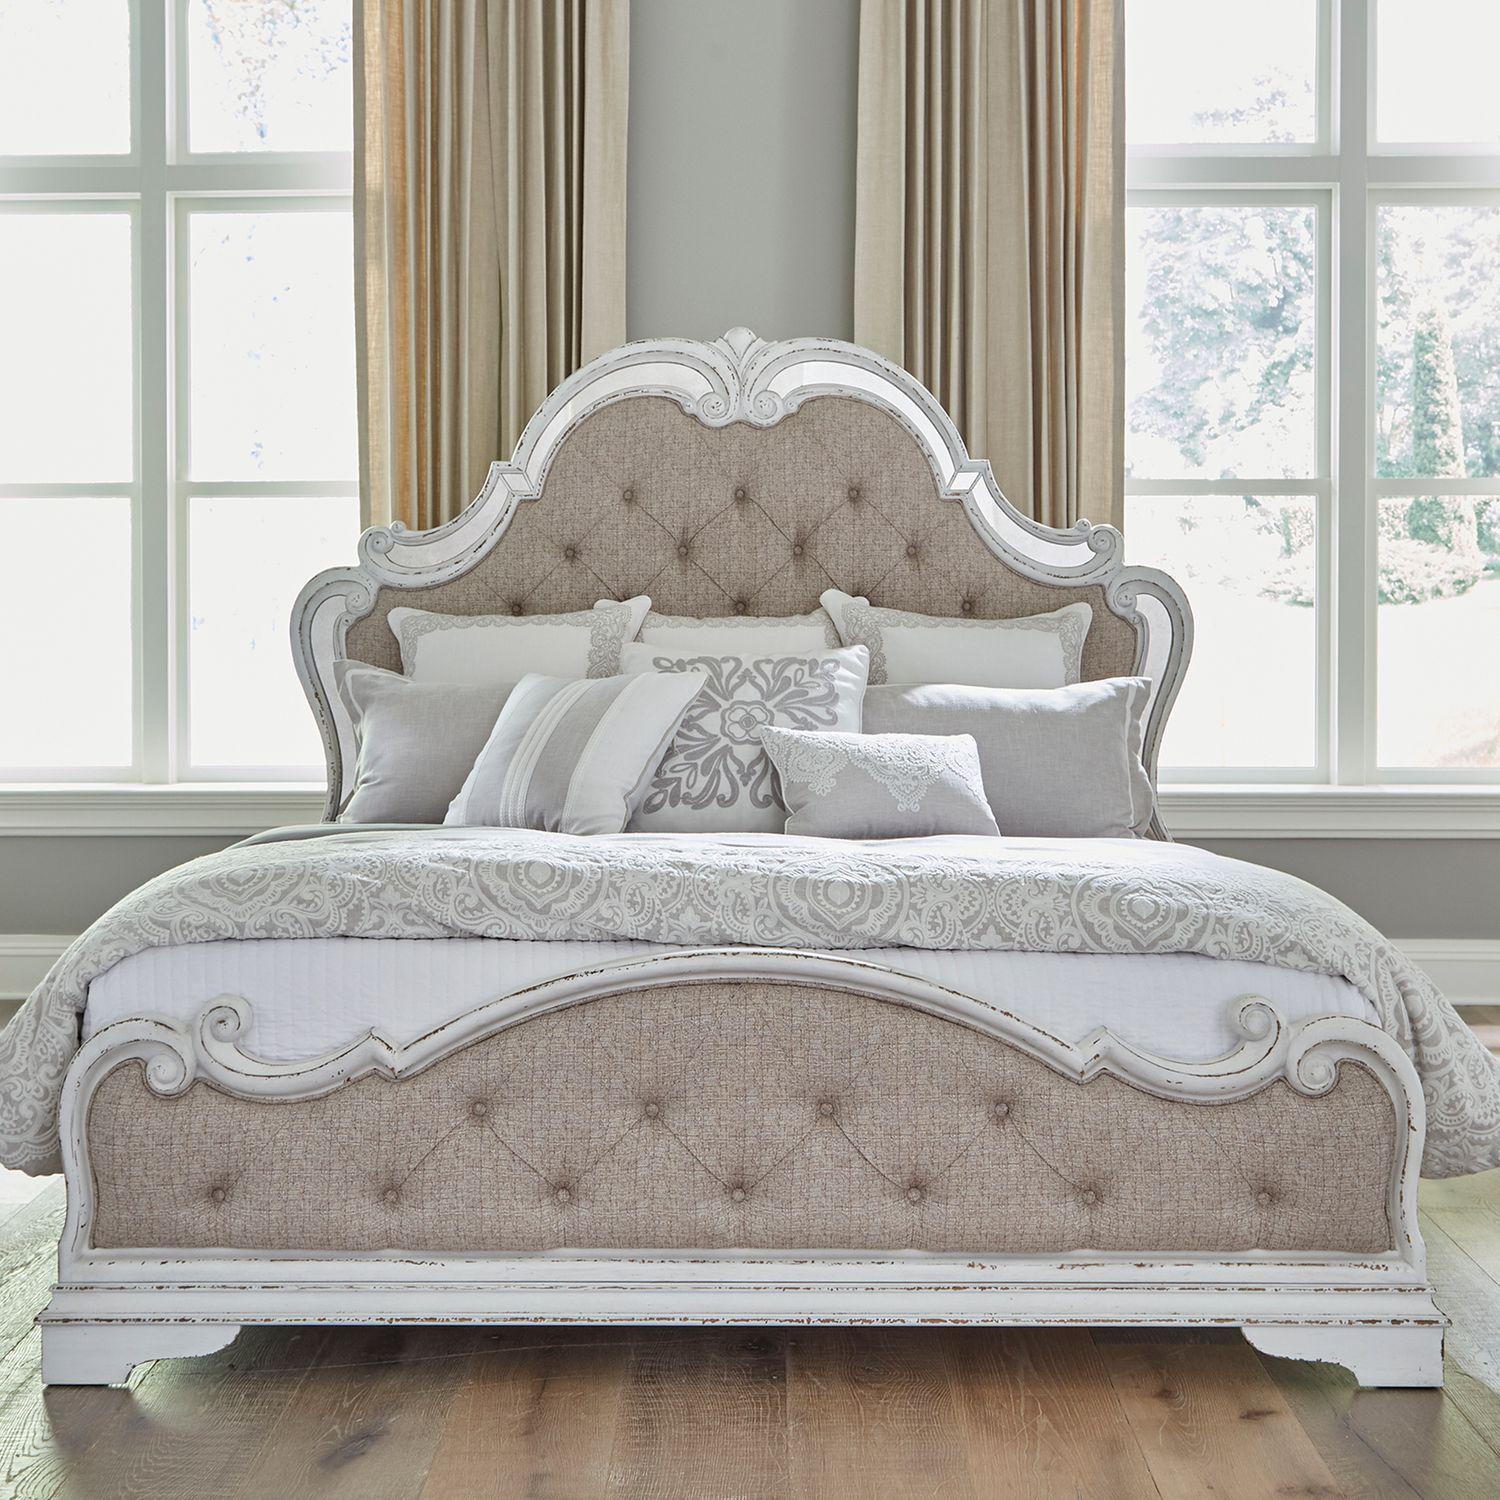 European Traditional Platform Bed Magnolia Manor  (244-BR) Mirrored Bed 244-BR-OKUB in White Chenille